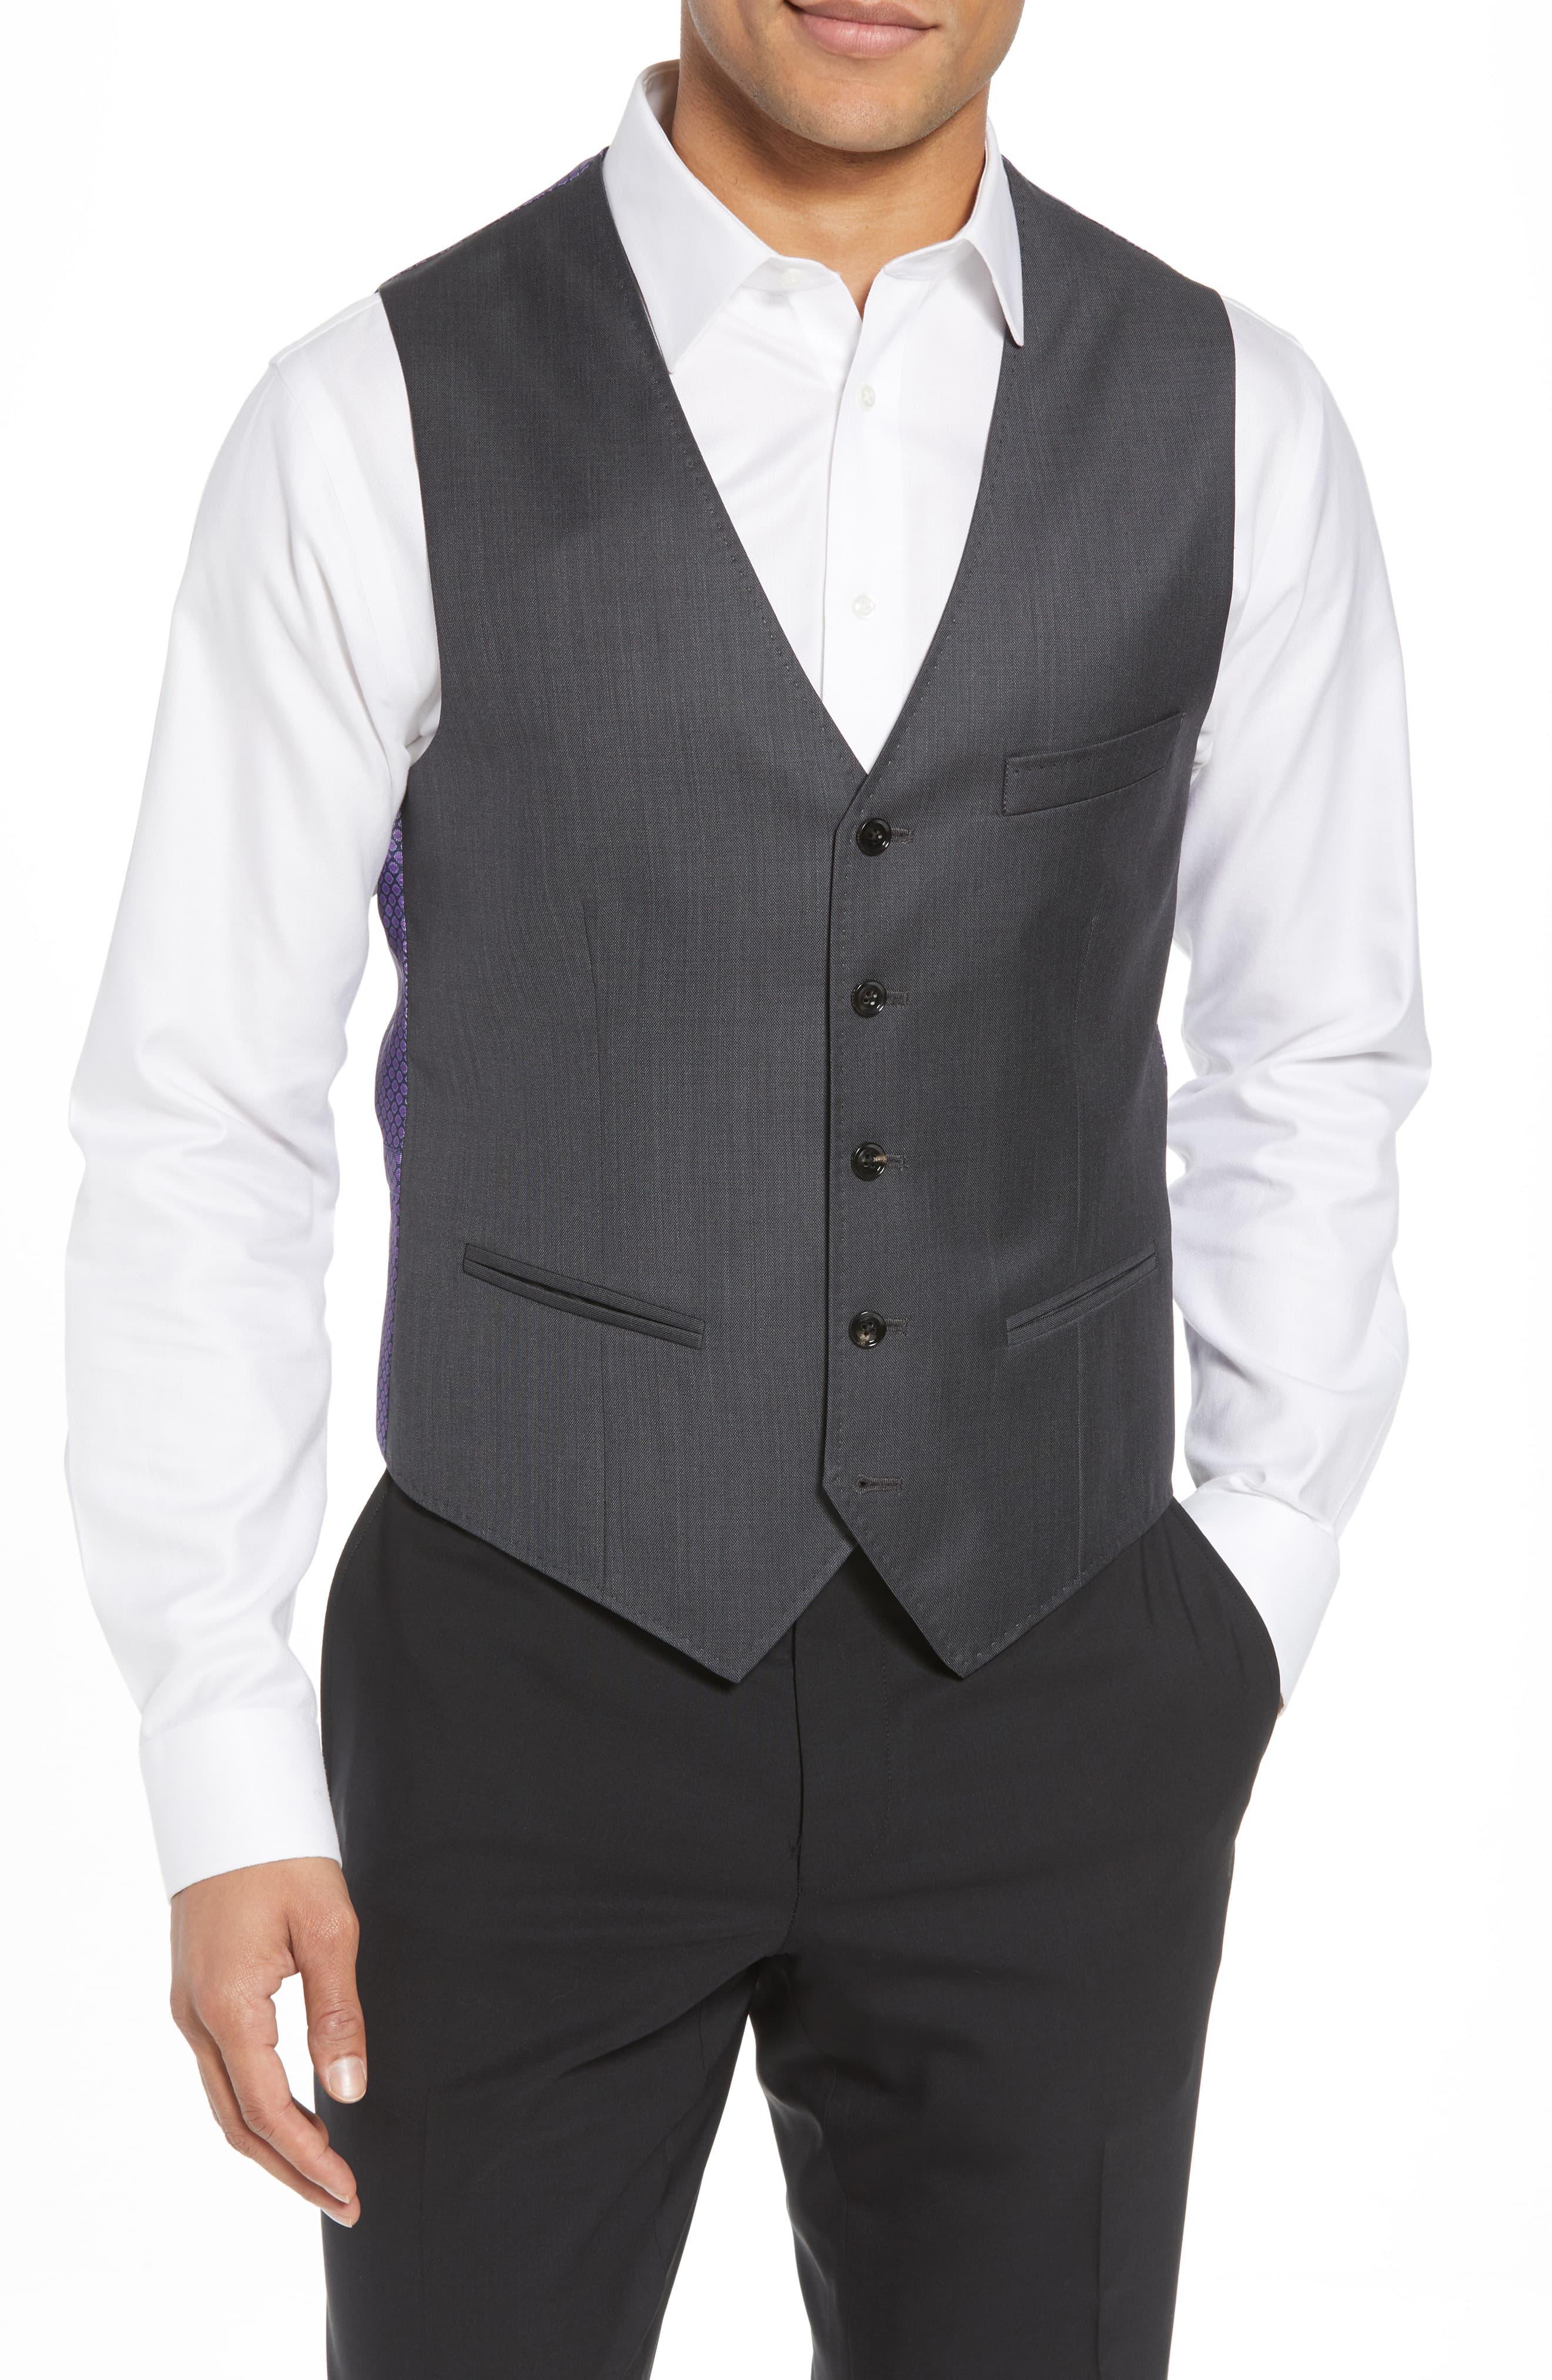 Ted Baker Troy Slim Fit Solid Wool Vest in Charcoal (Gray) for Men - Lyst